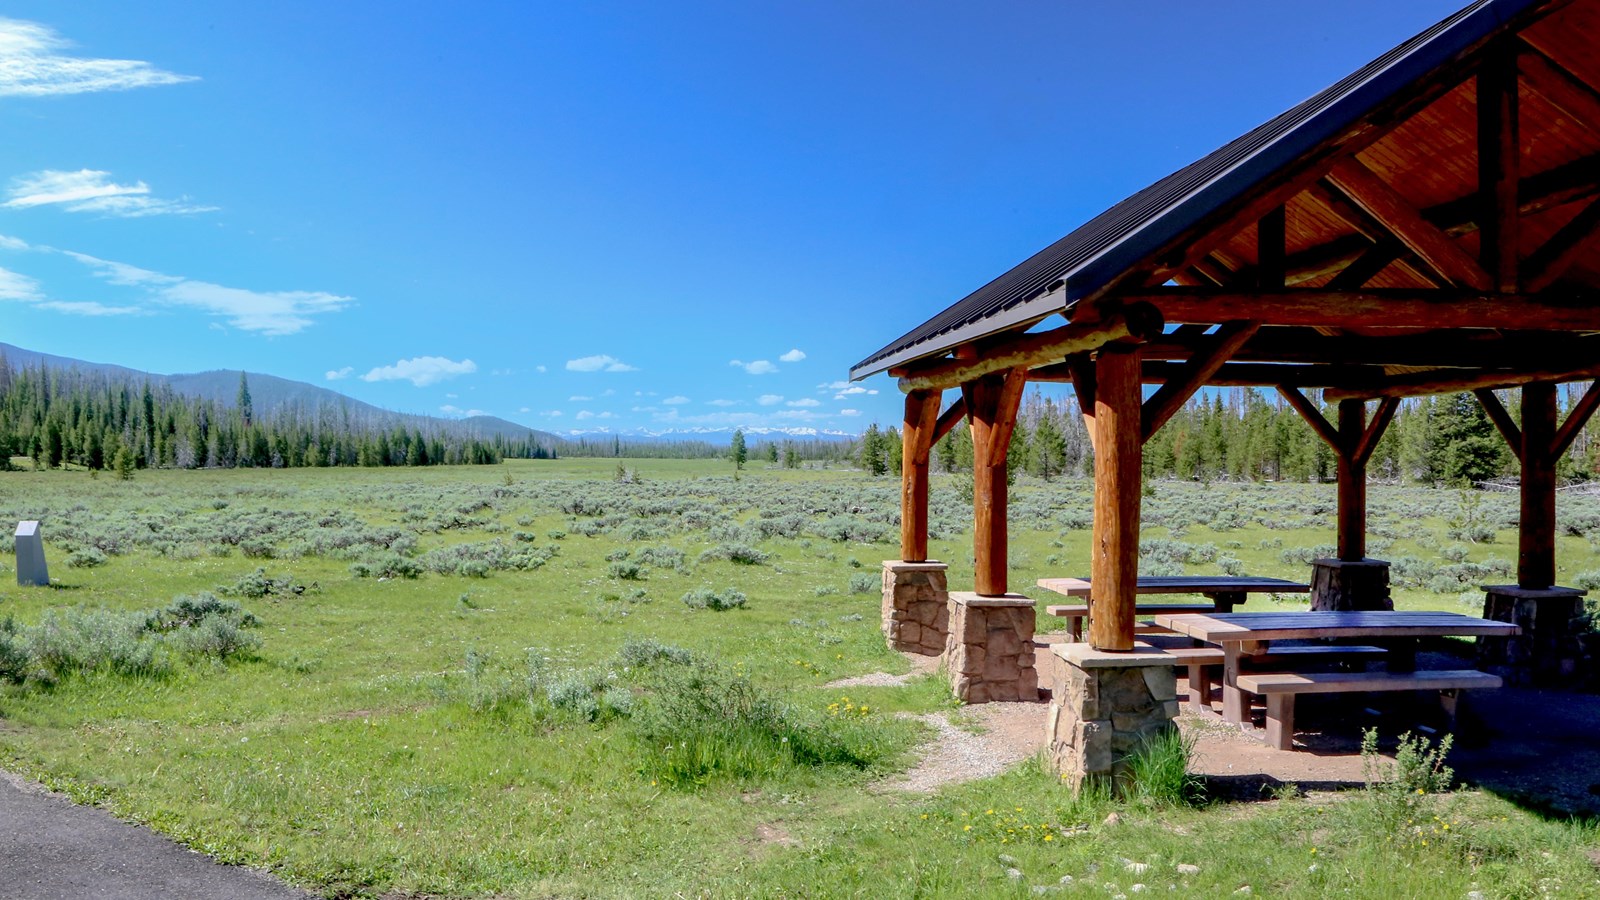 A wooden picnic shelter opens onto a broad, green field under a blue sky.